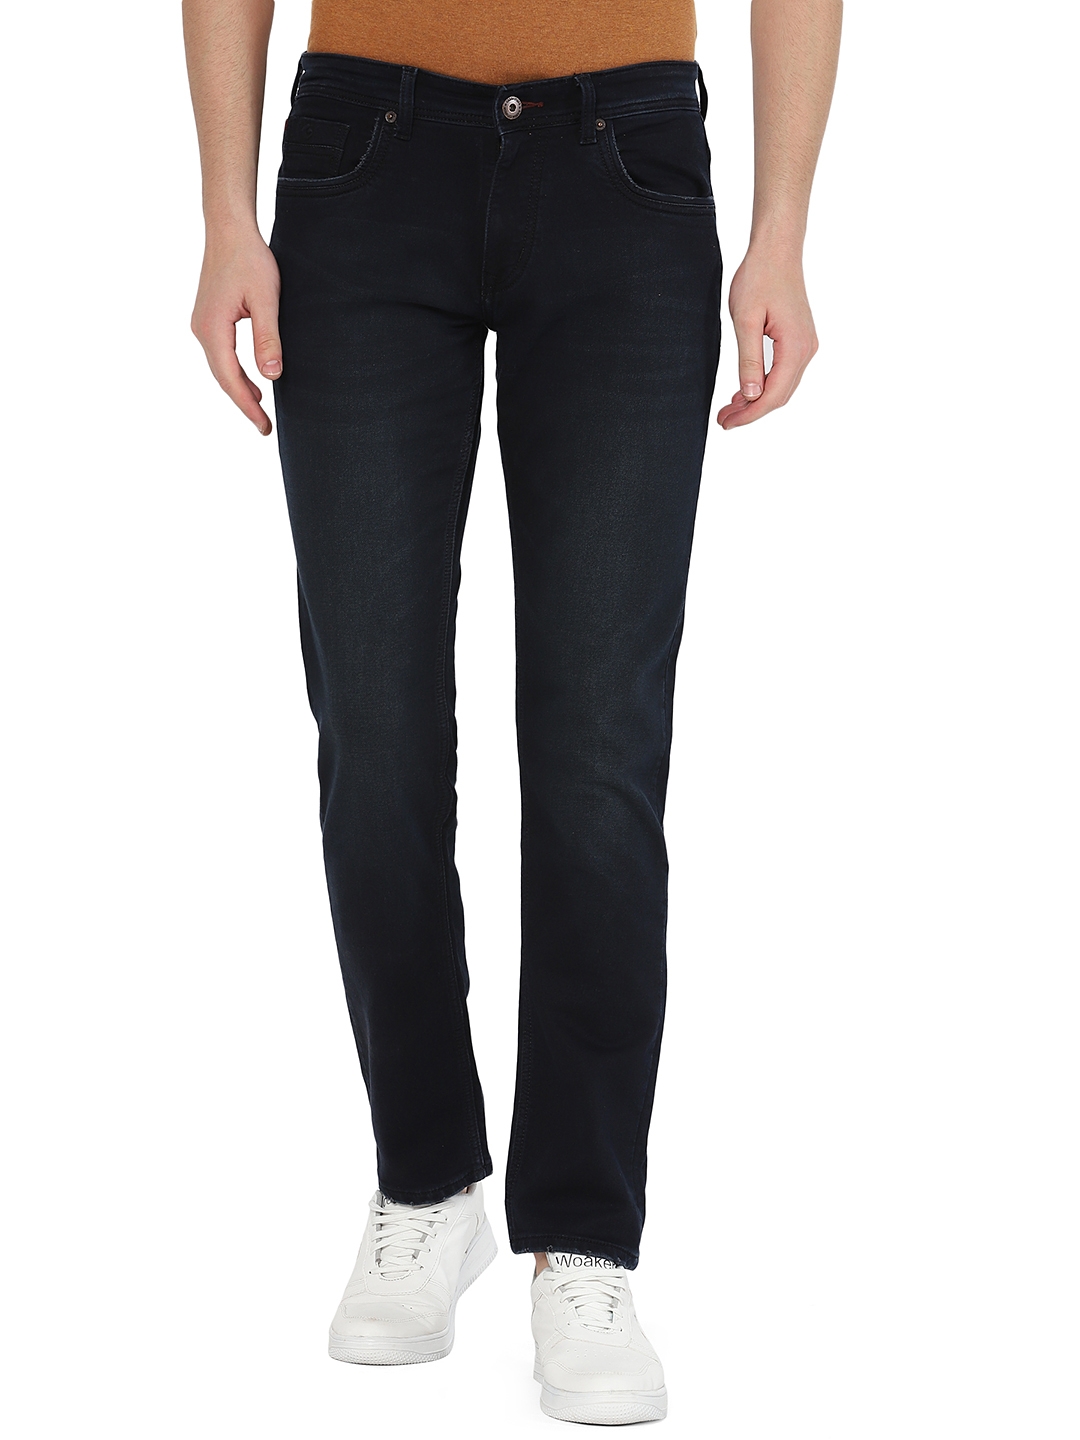 Greenfibre | Indigo Blue Washed Straight Fit Jeans | Greenfibre